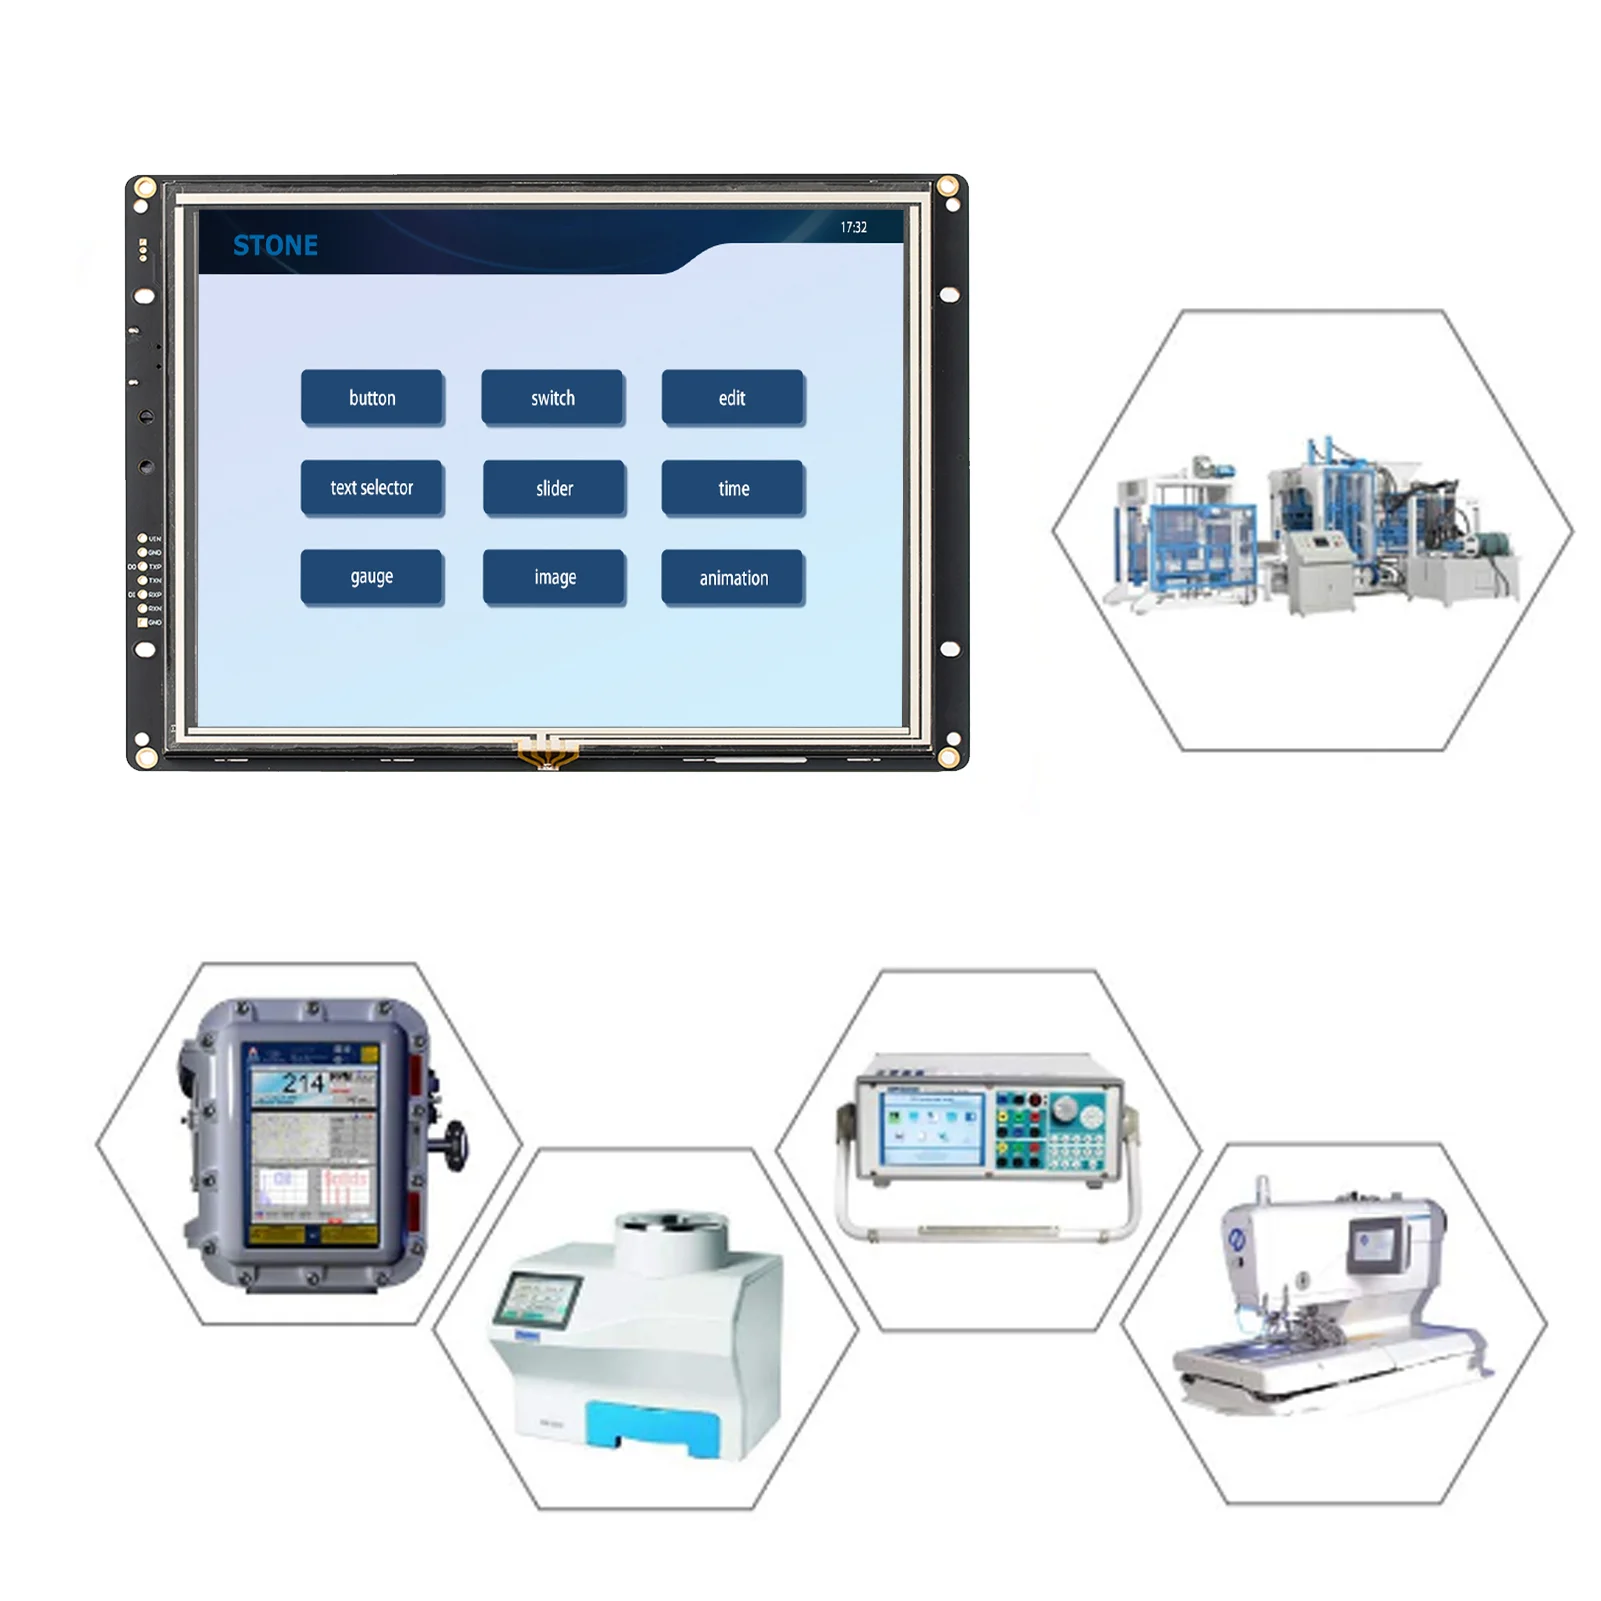 8 inch colorful touchscreen Tft Lcd display with RS232/485/TTL interface